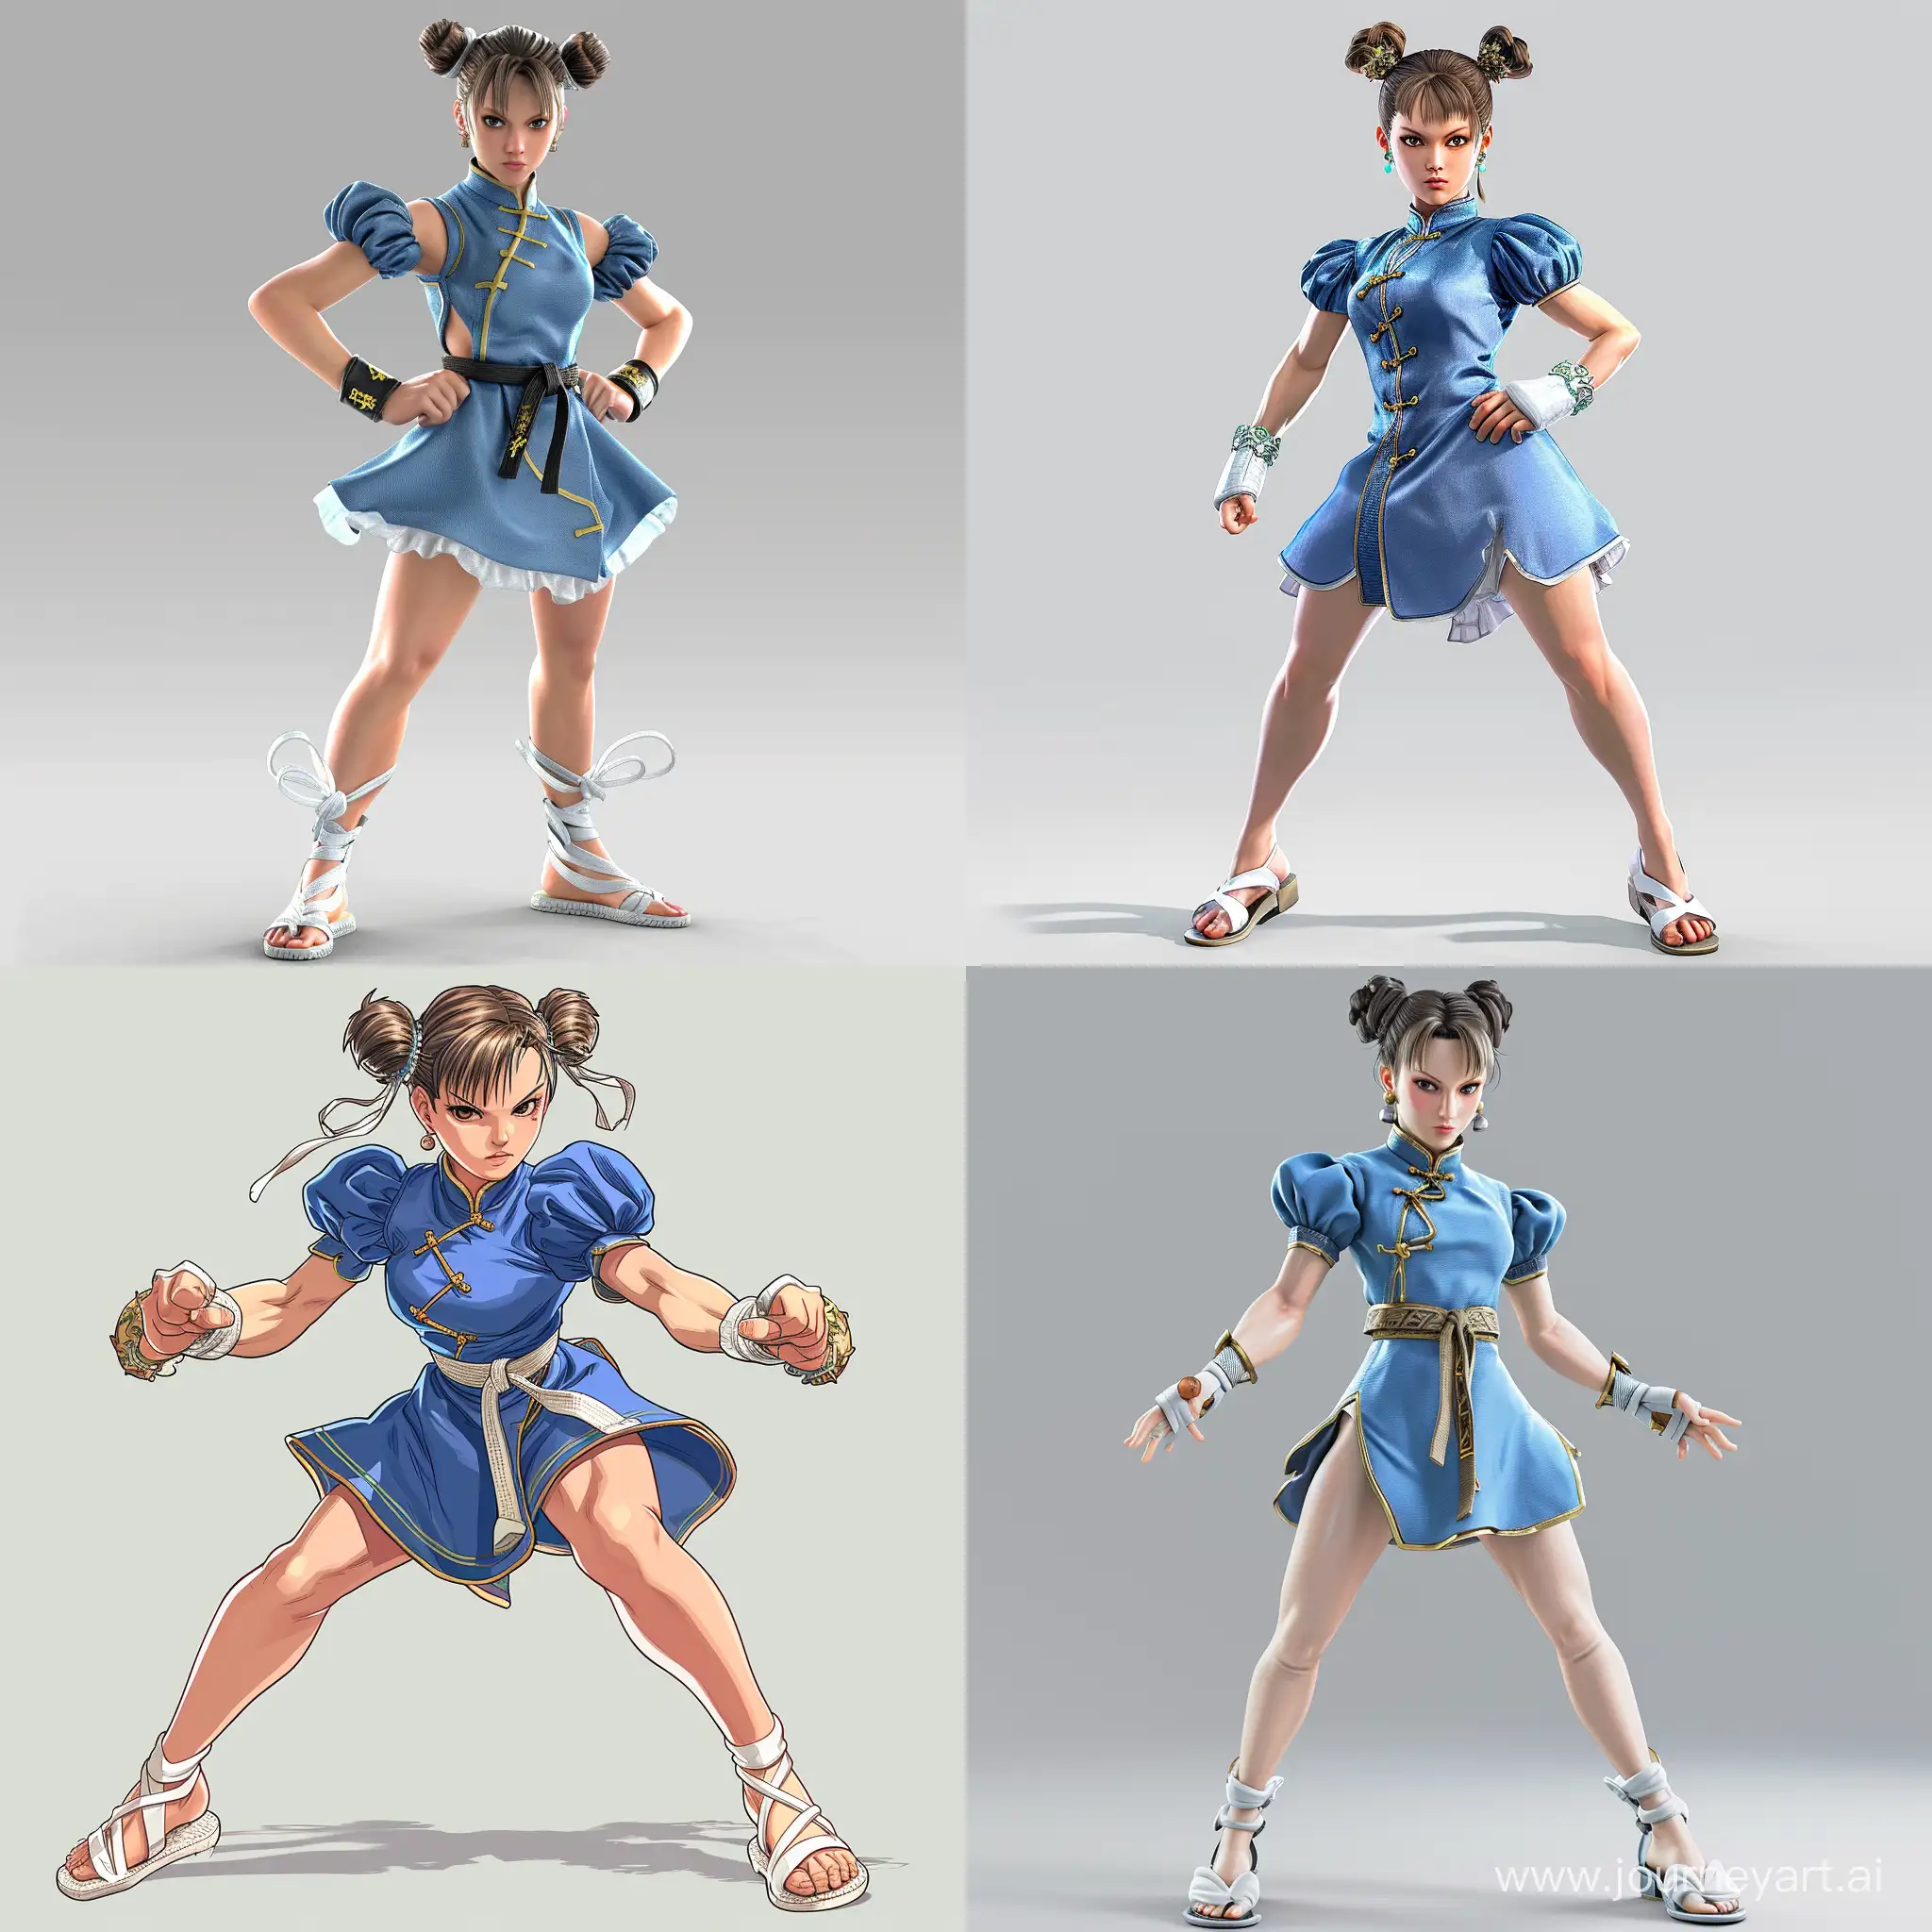 Chun-Li from street fighter she wears ((short blue qipao with short puffy sleeves)), ((white sandals)), wide shot, ((her hair has two buns)), (full body figure), dynamic pose